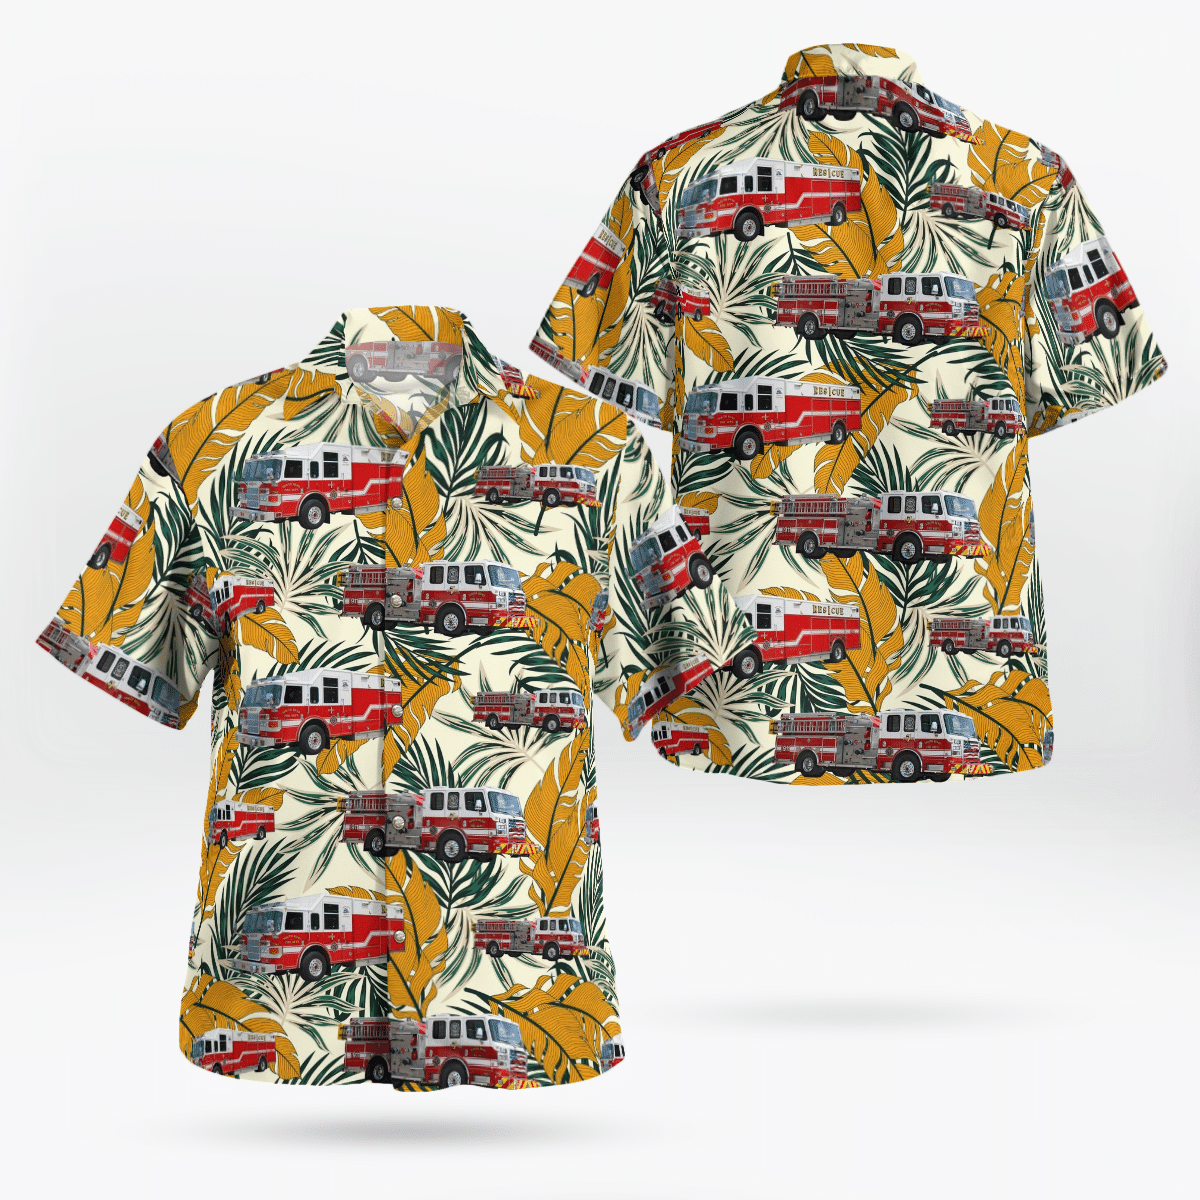 If you are in need of a new summertime look, pick up this Hawaiian shirt 97